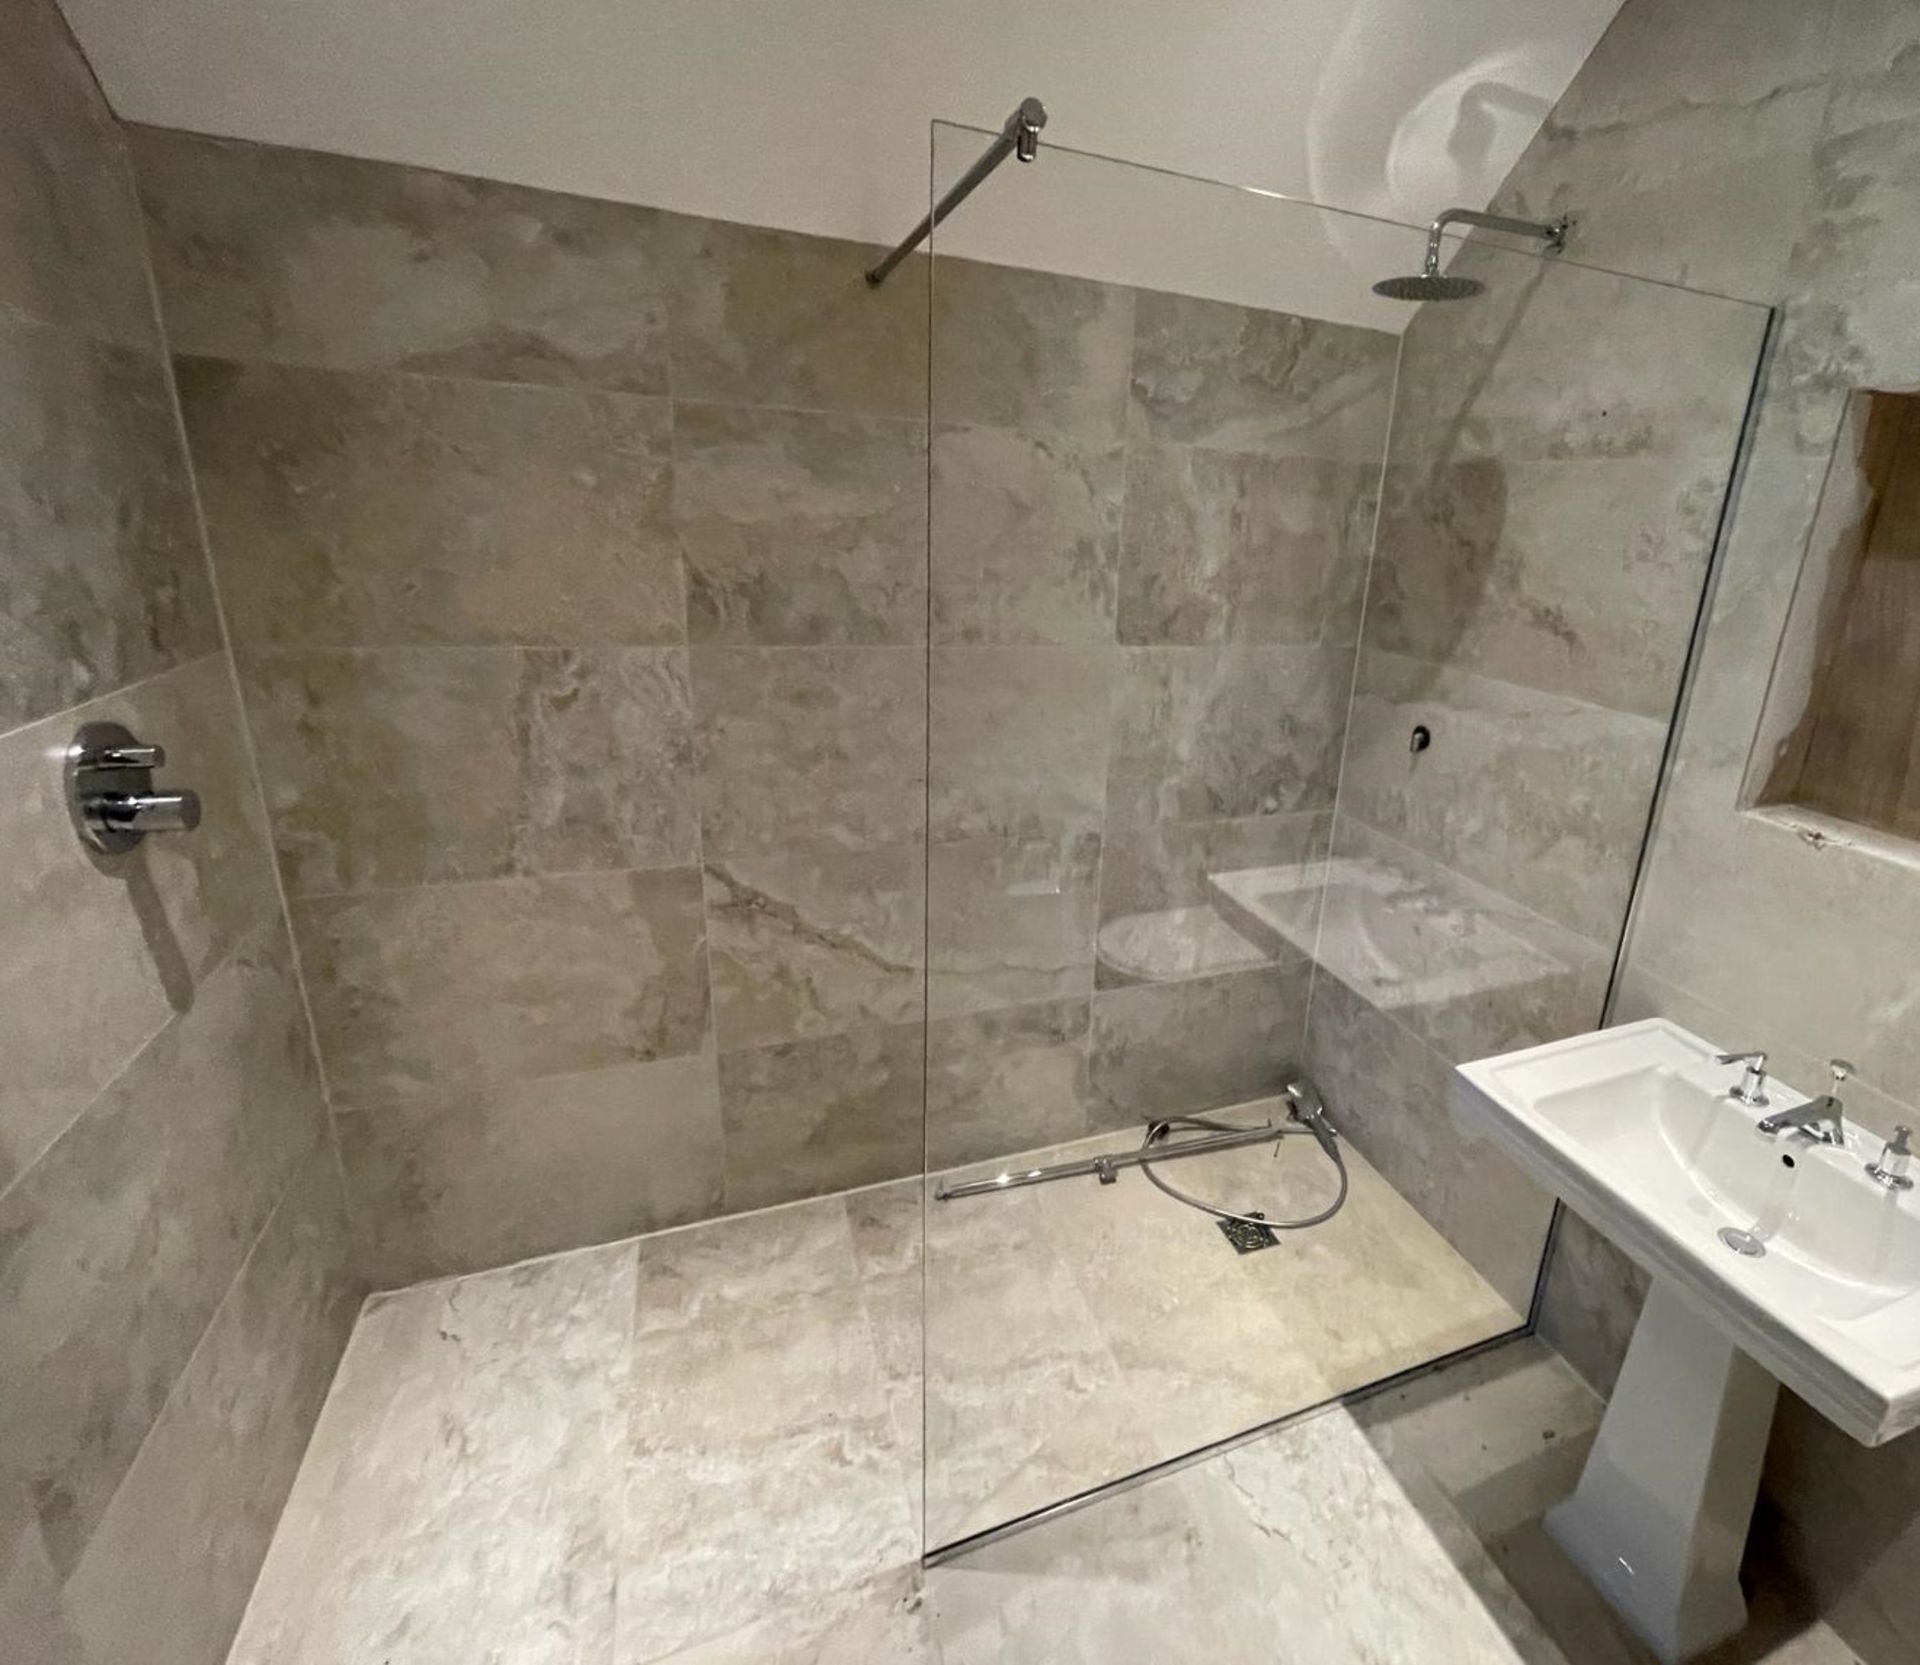 1 x Hansgrohe AXOR Premium Shower and Enclosure - Ref: PAN274 / Bed2bth - CL896 - NO VAT ON THE - Image 3 of 7